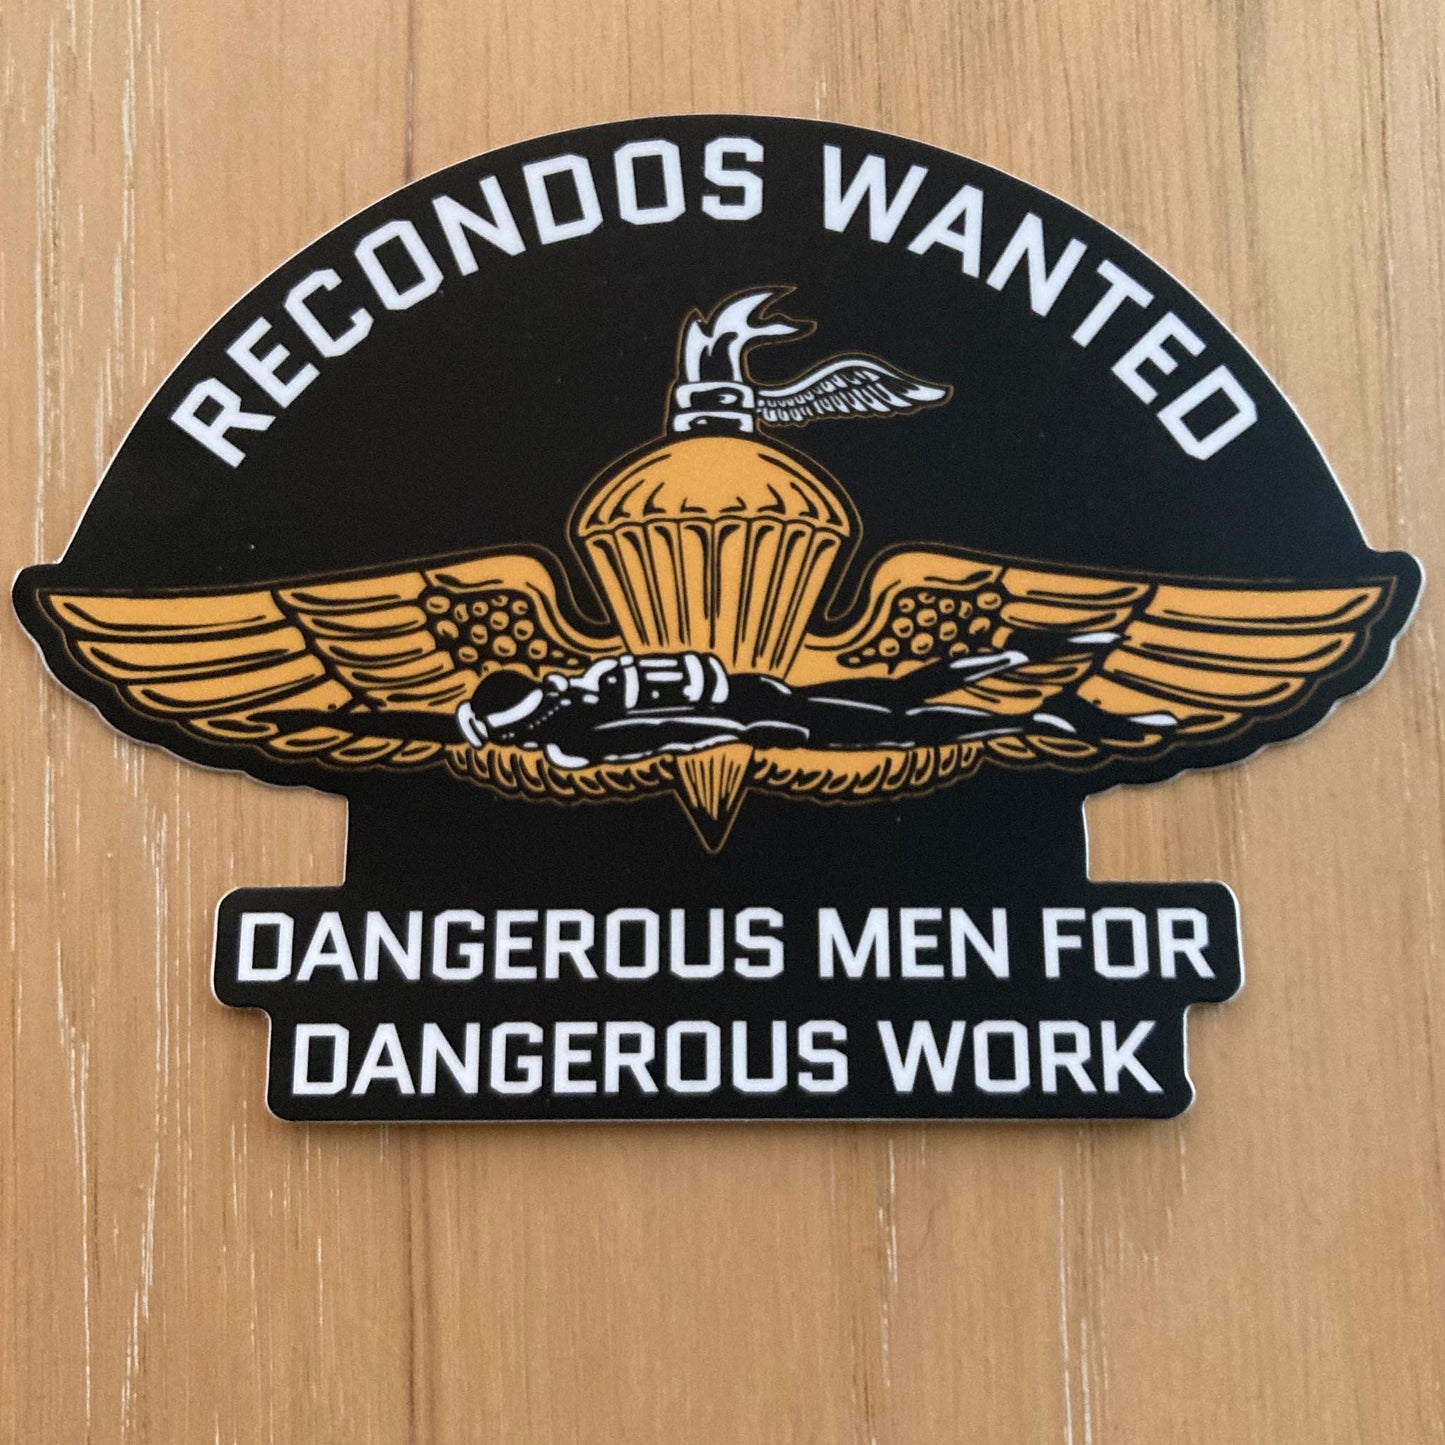 RECONDOS WANTED STICKER